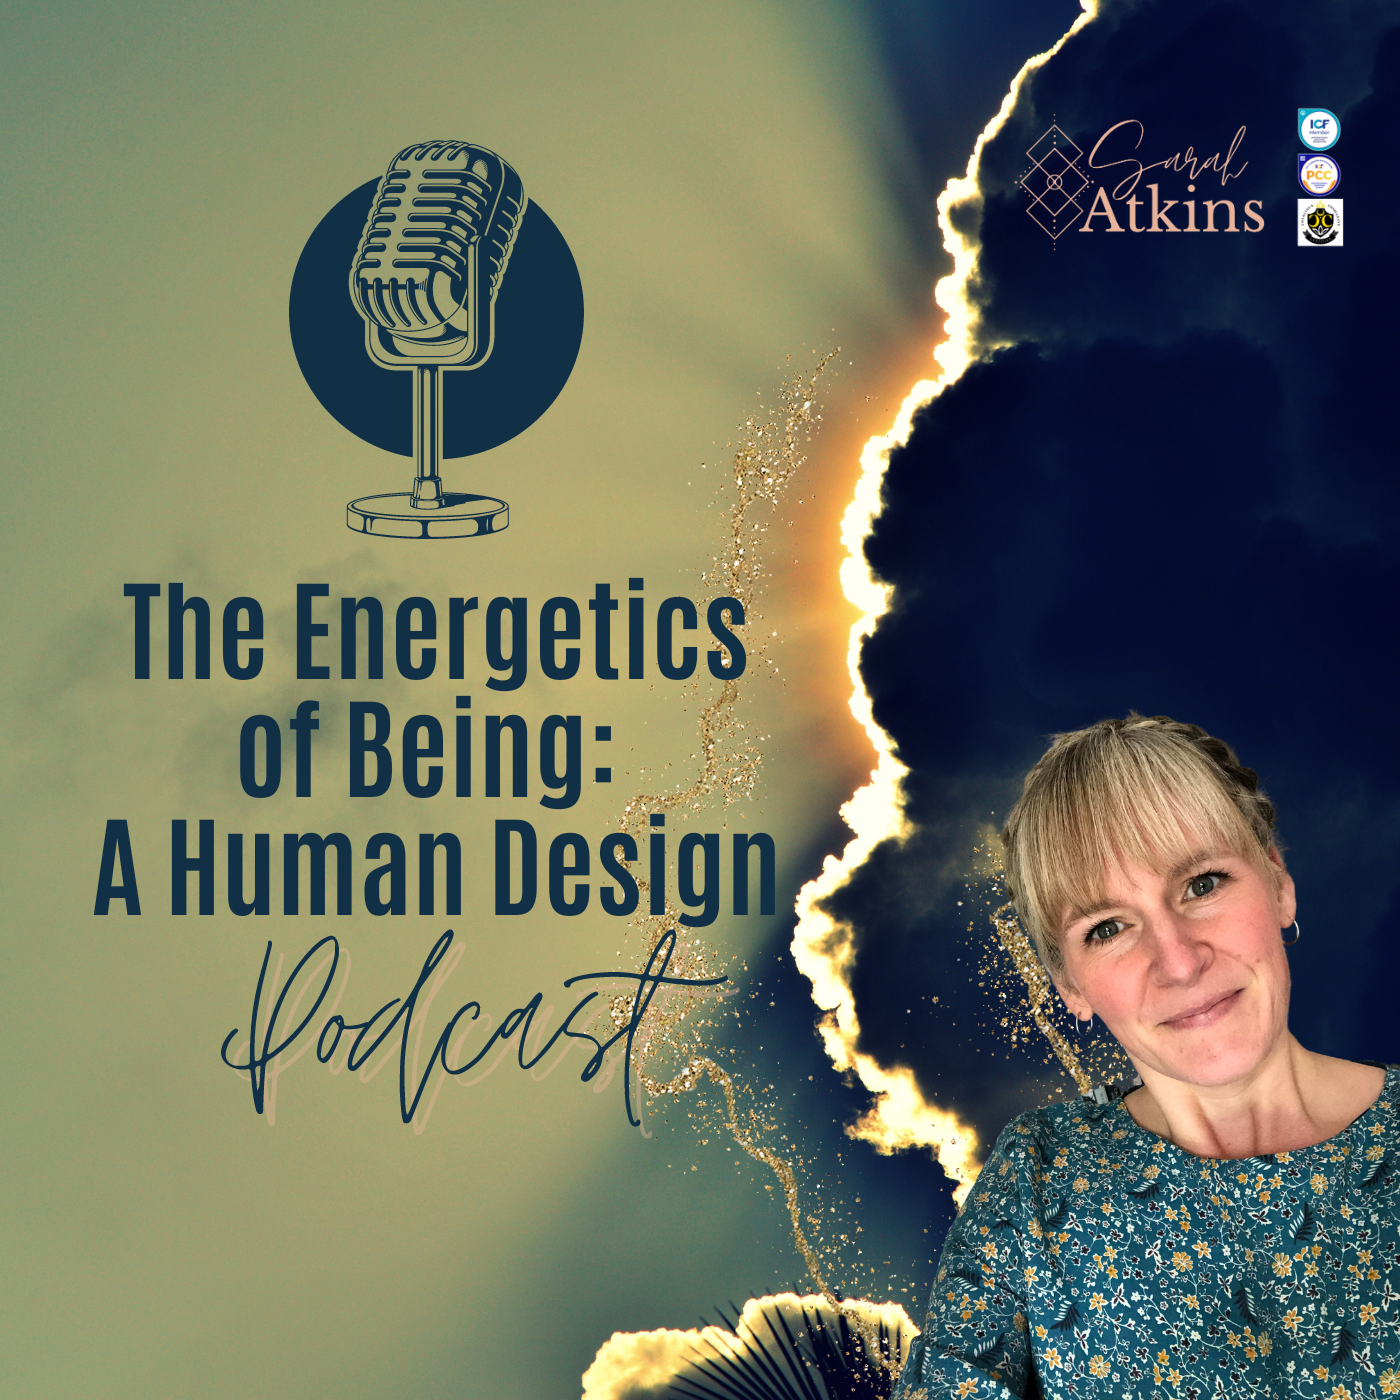 The Energetics of Being: A Human Design Podcast. Includes a photo of Sarah Atkins